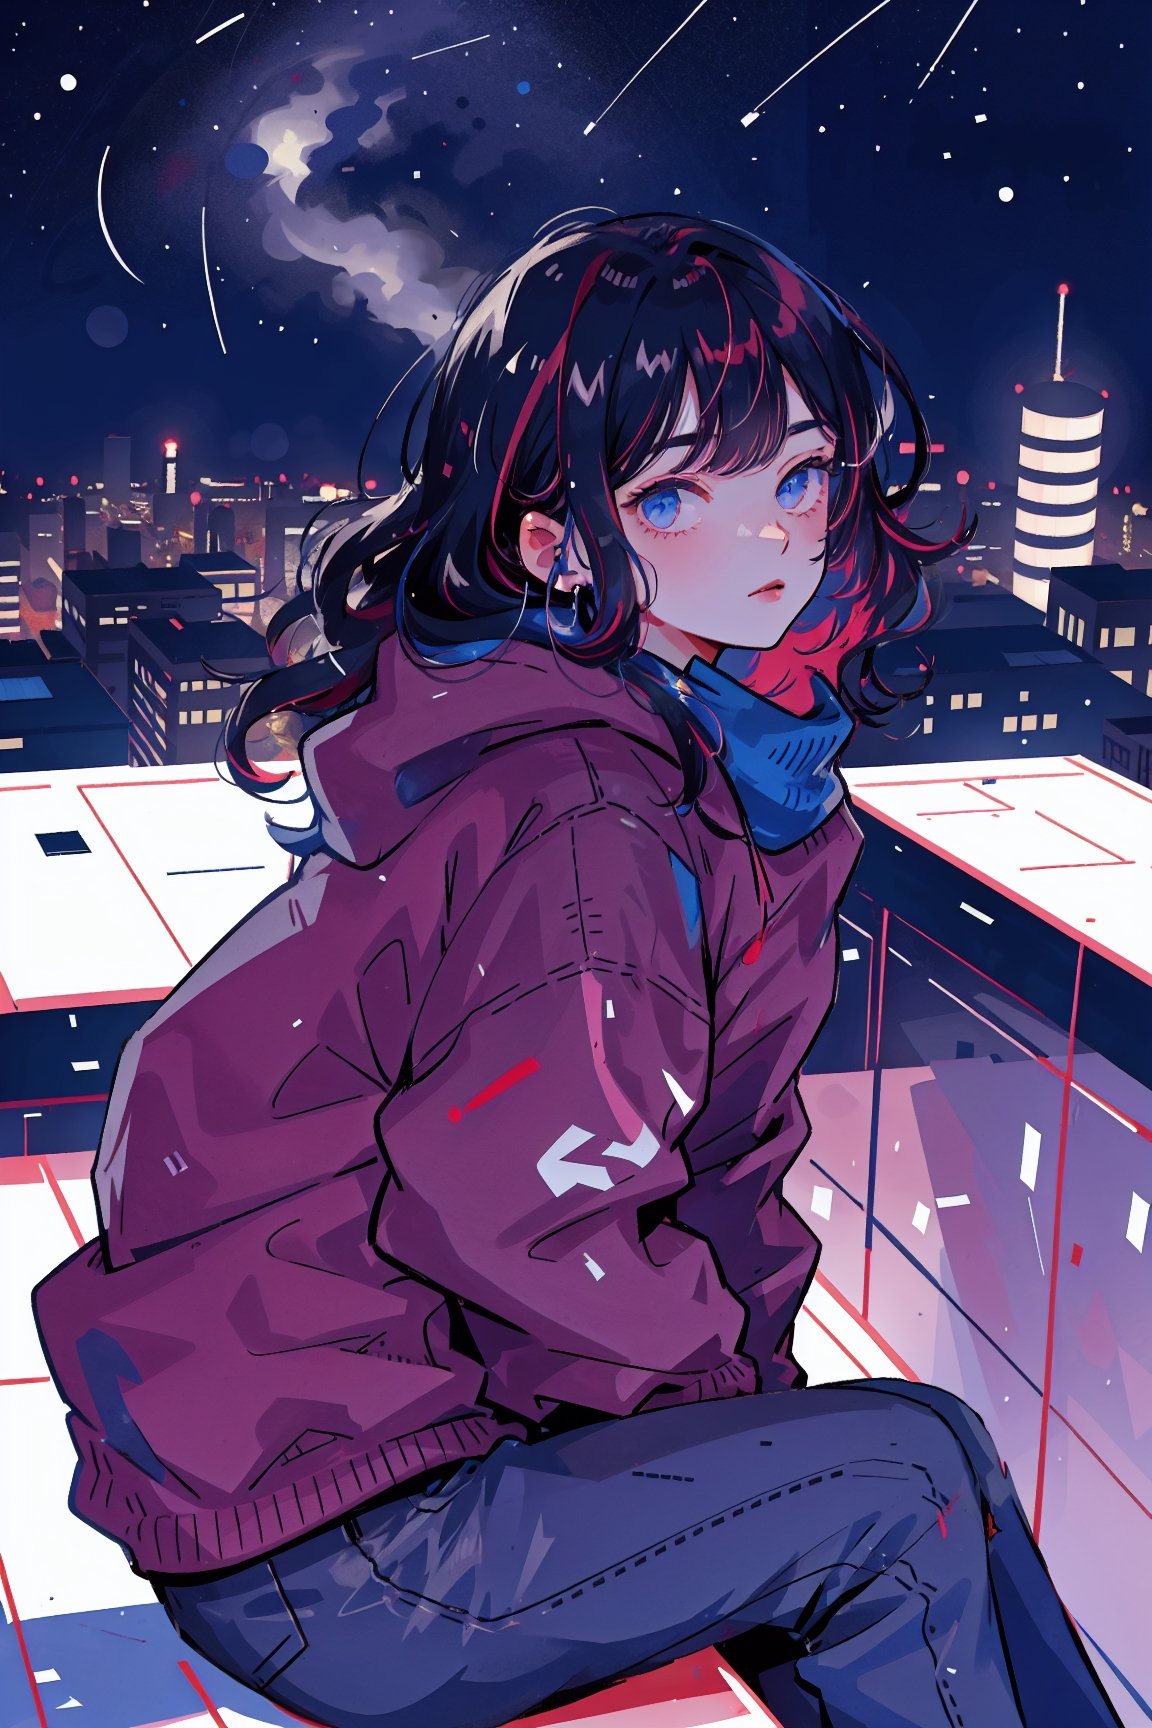 A girl sits on the rooftop, gazing up at the starry sky. The photograph captures only her silhouette, concealing her face.